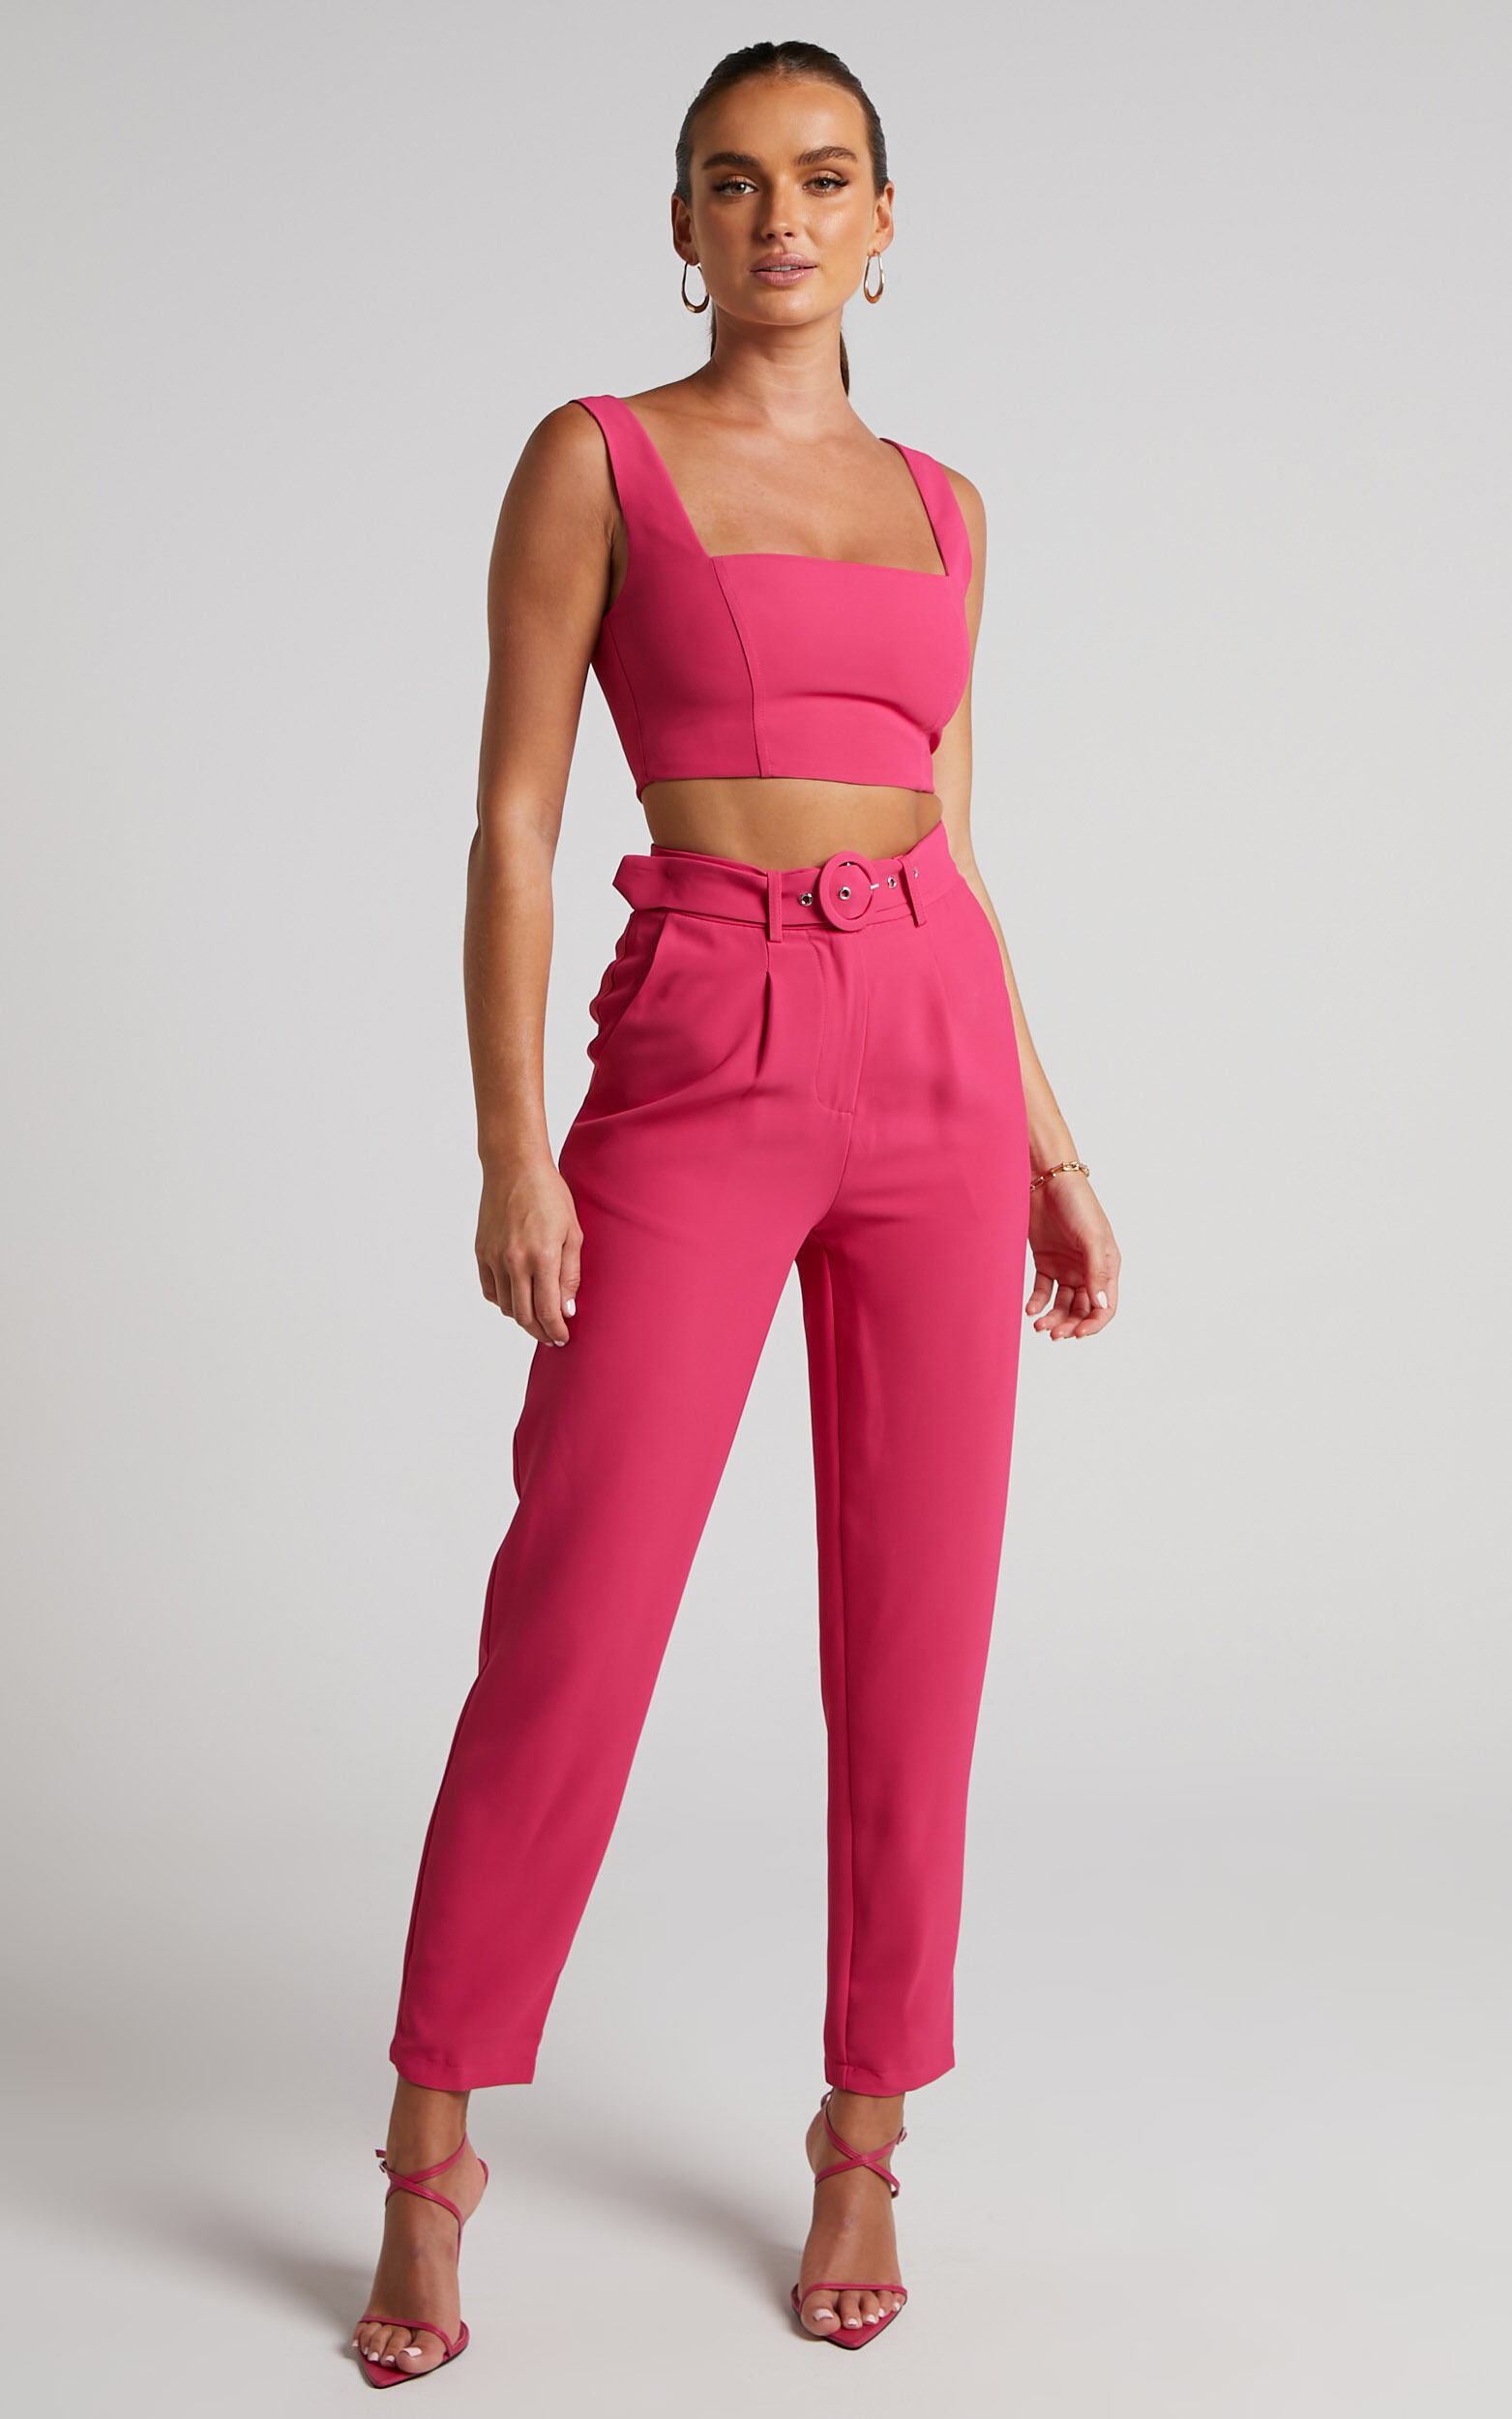 Reyna Two Piece Set - Crop Top and Tailored Pants Set in Pink - 04, PNK1